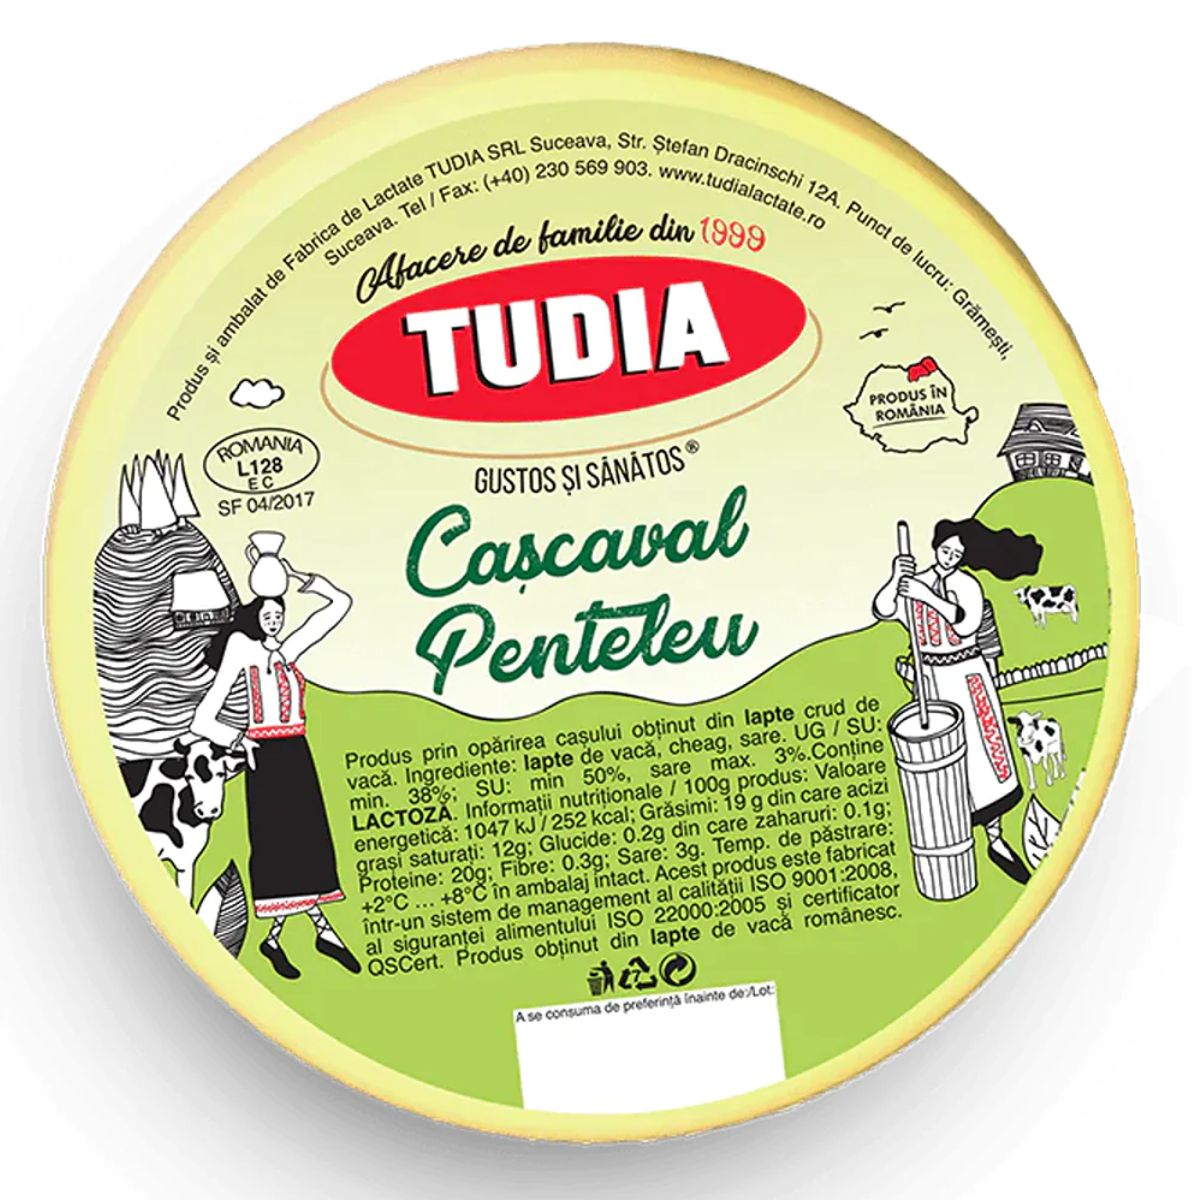 Label for a traditional romanian cheese product called "Tudia - Cheese Penteleu - 400g," highlighting its family tradition since 1999 and showcasing some nutritional information and ingredients.